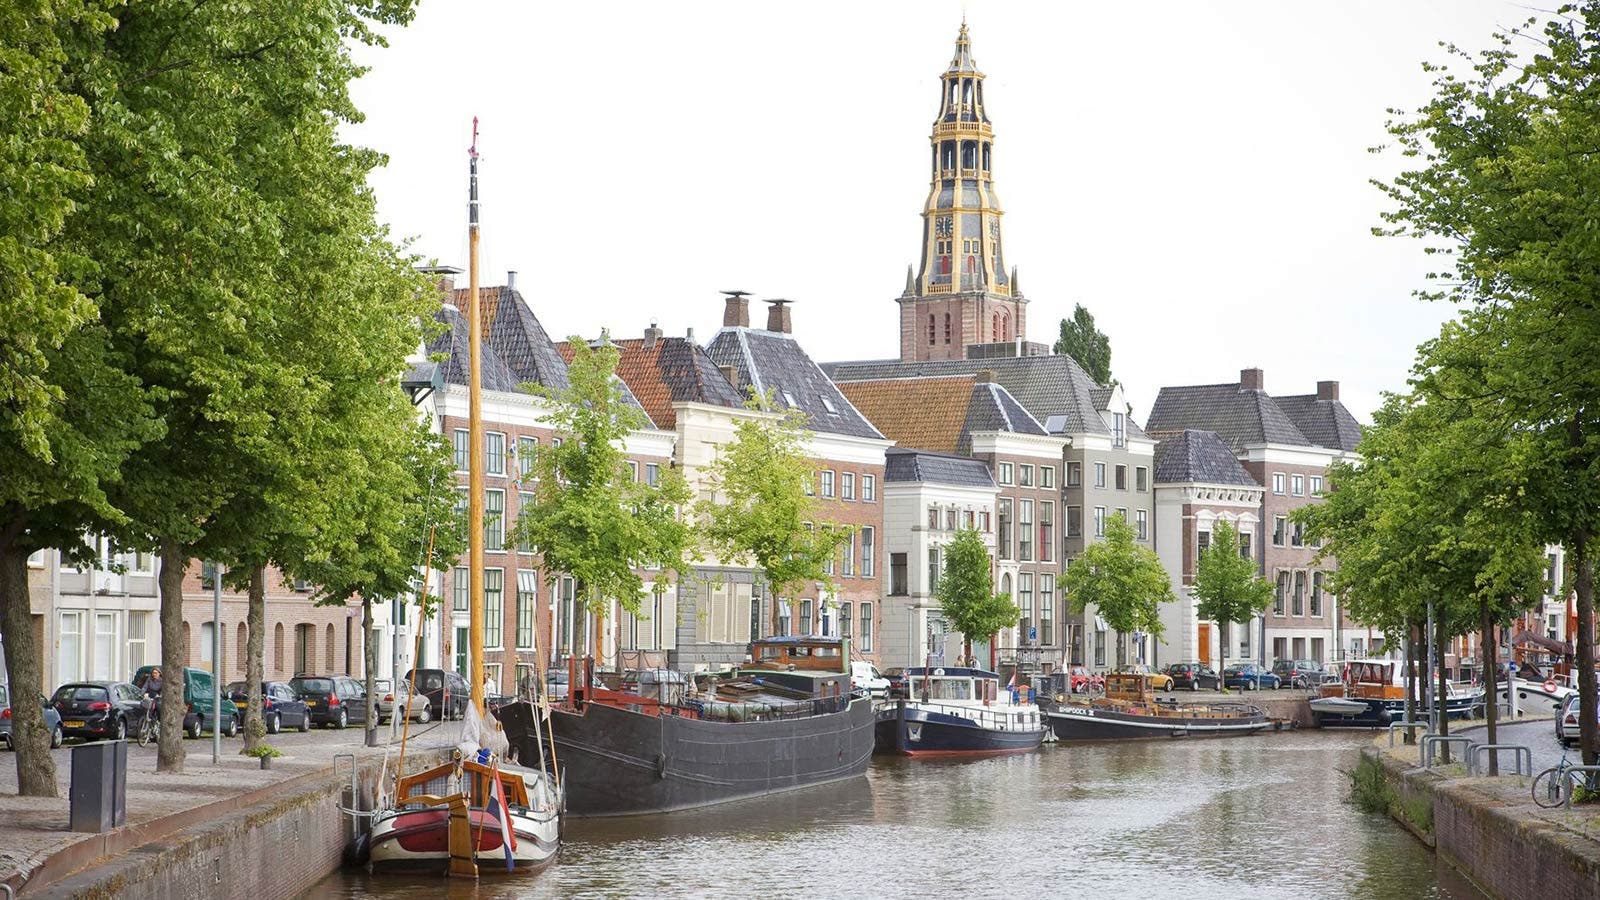 Beautiful canals and historic buildings in Groningen